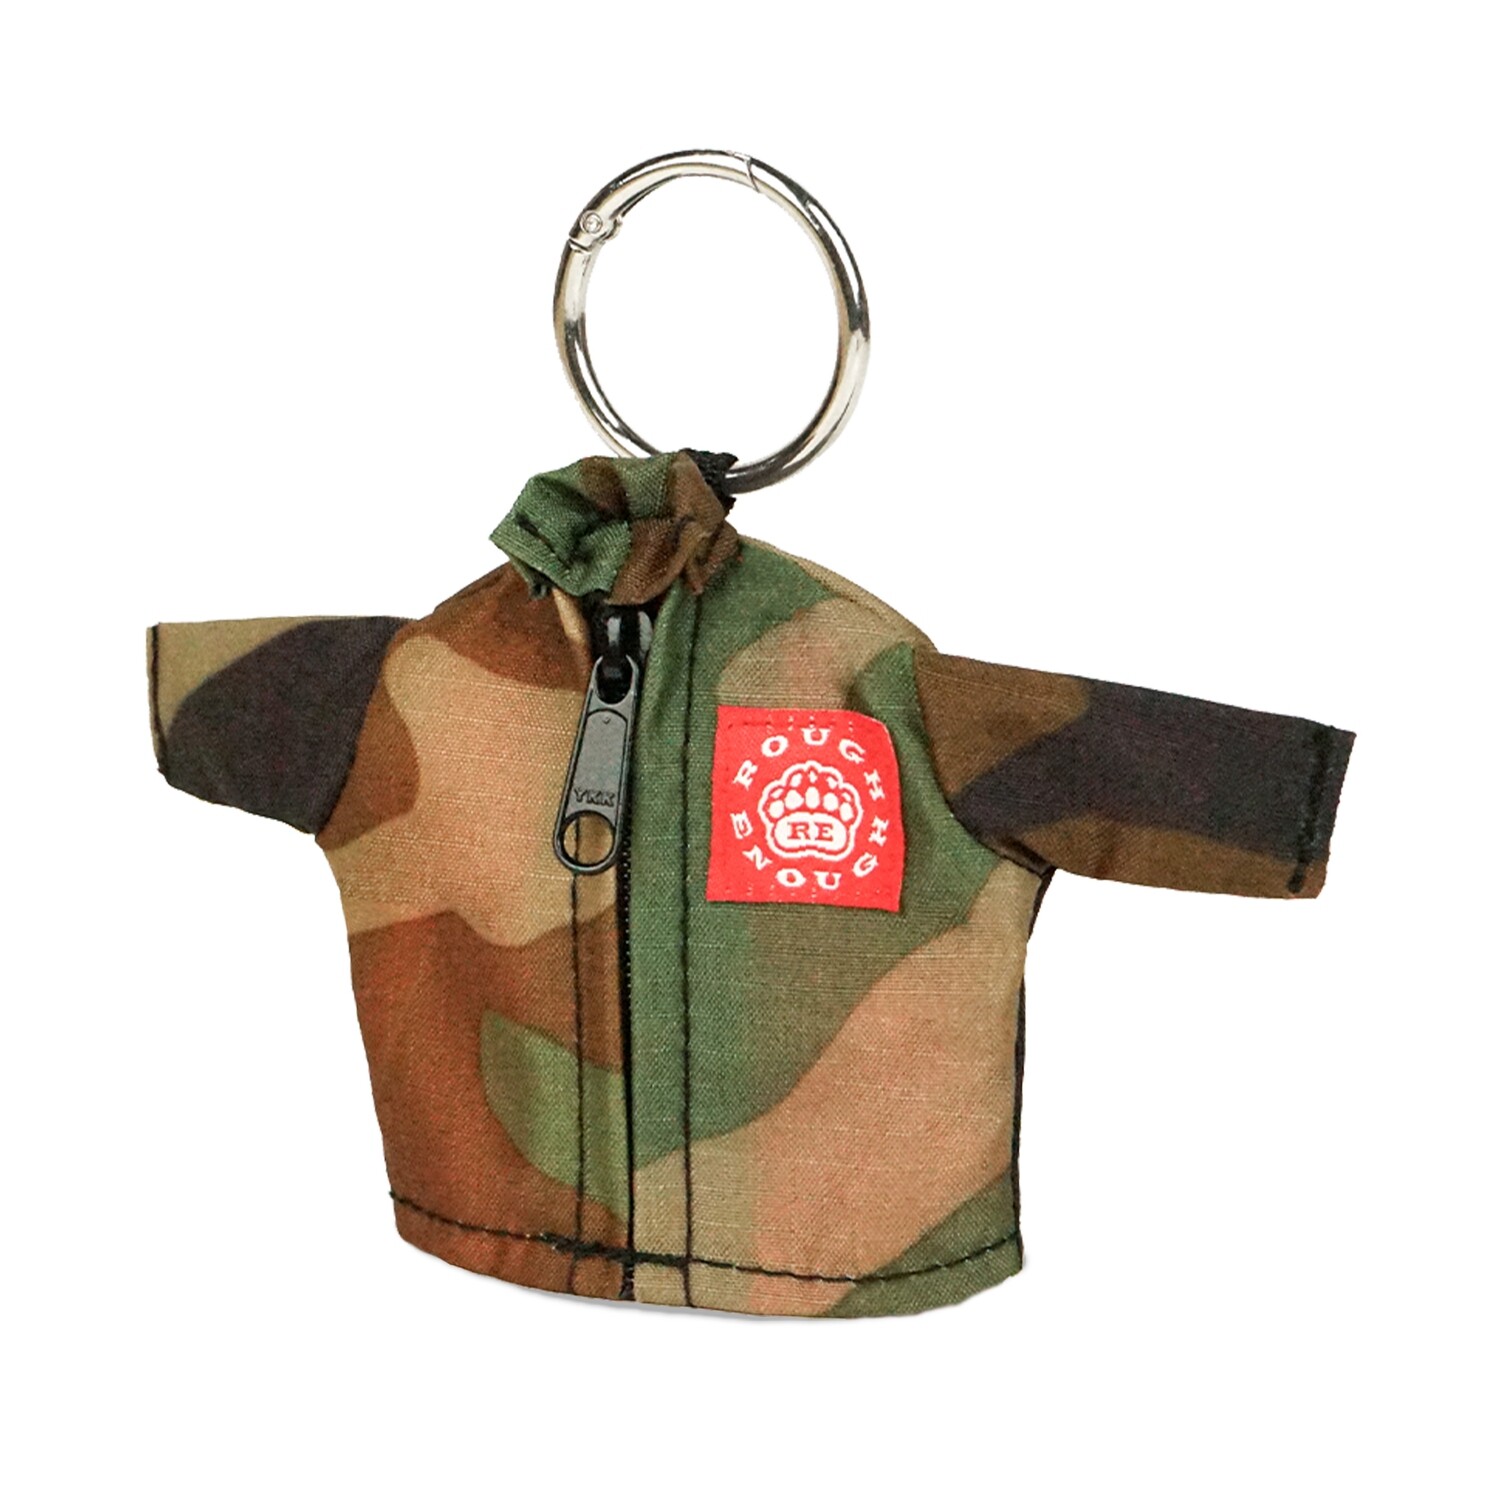 RE8577 Rough Enough Cute Keychain, Funny Small Coin Purse Keychain Pouch, Camo Jacket Style Key Chain, Glow in the Dark Function